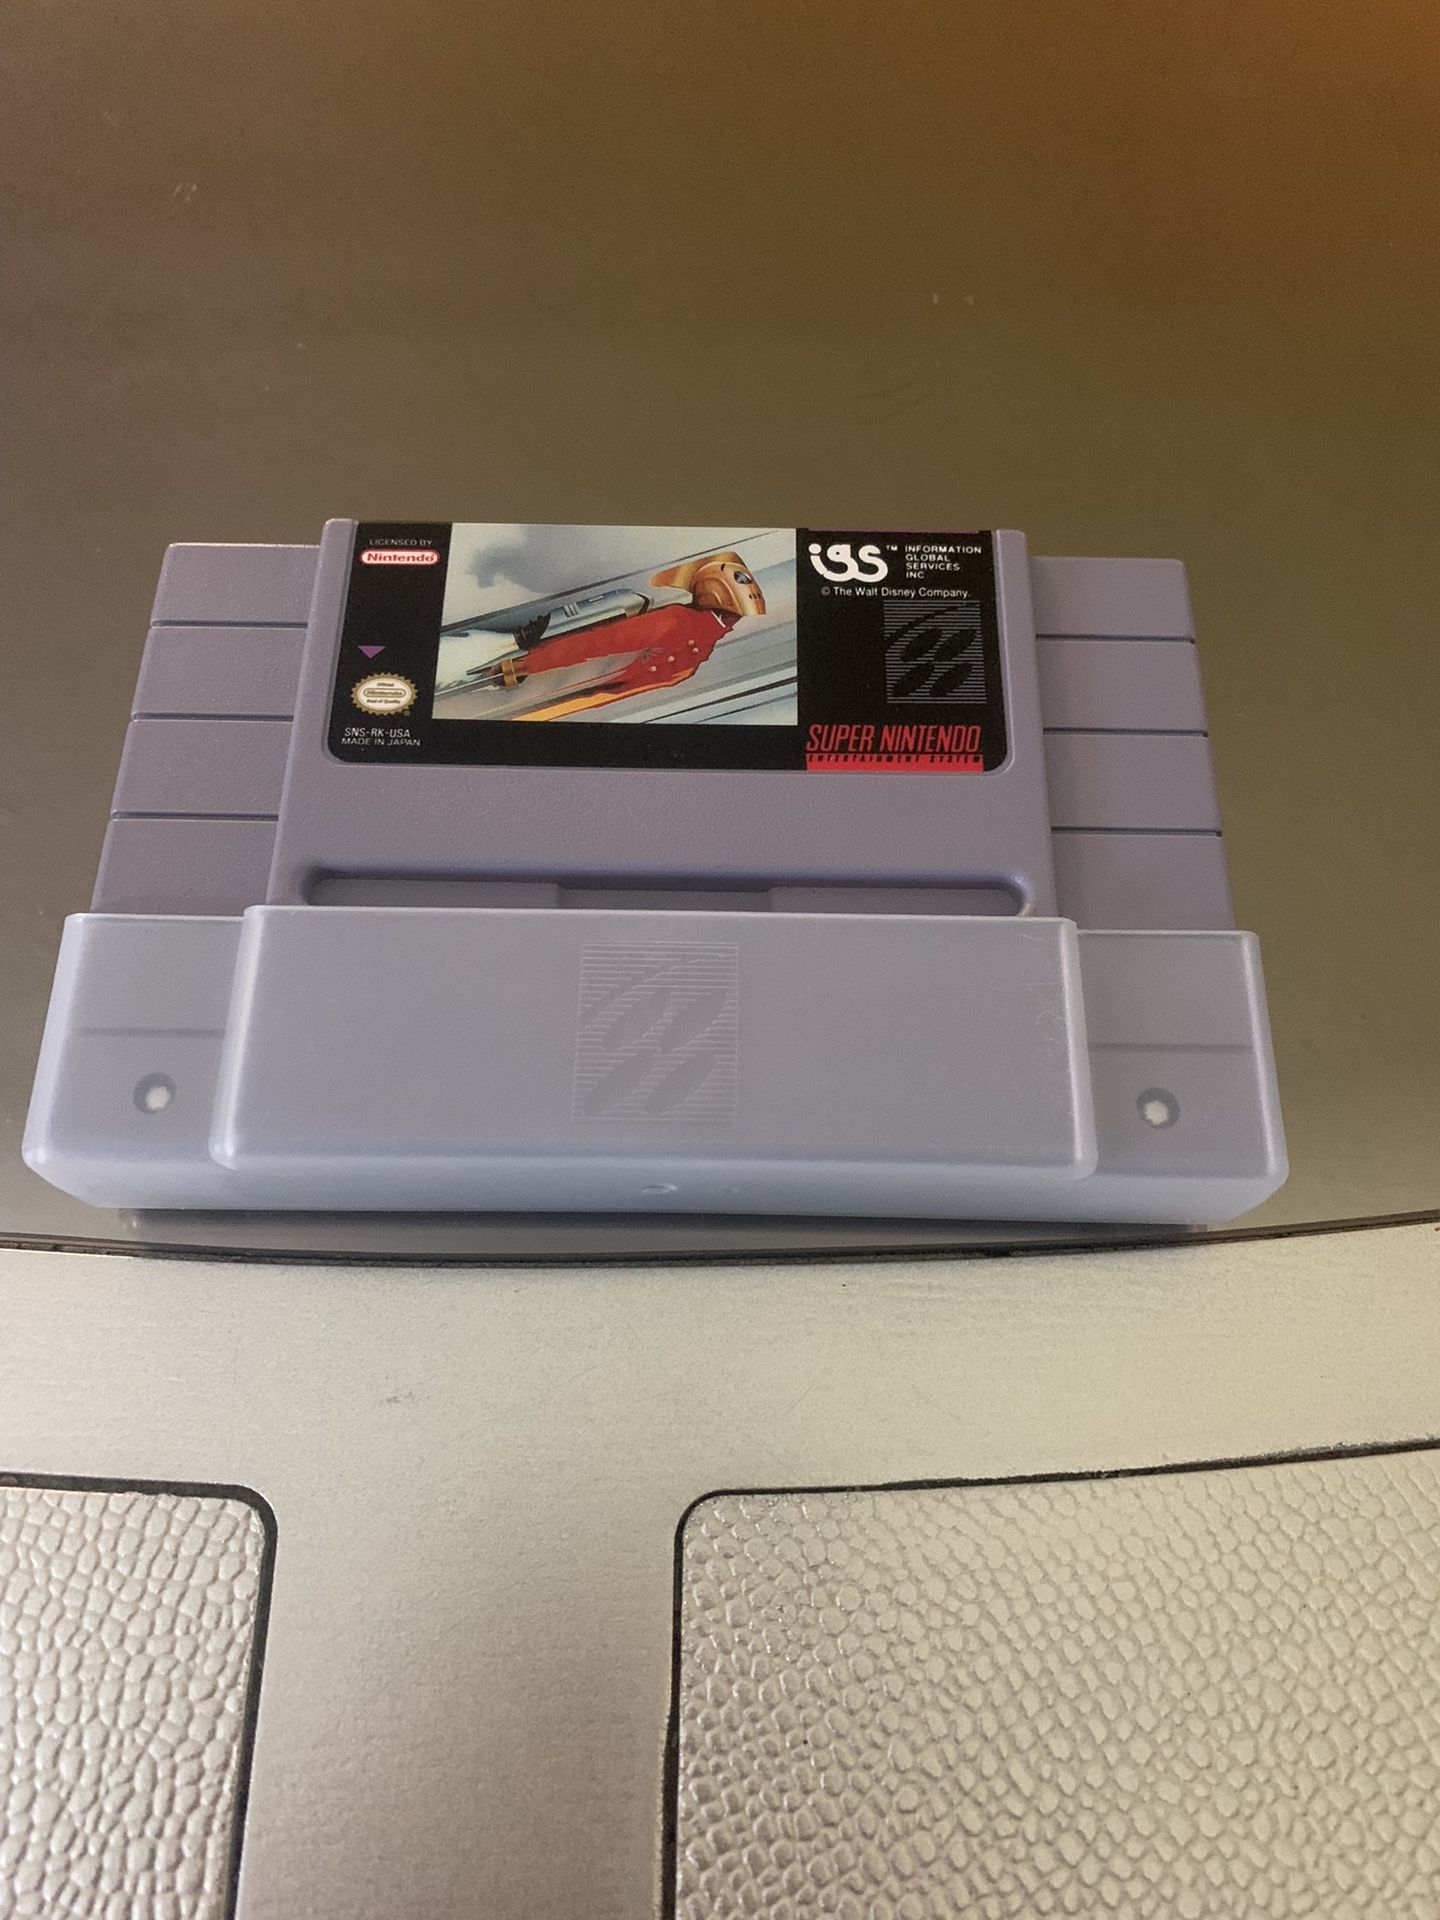 The Rocketeer For The Super Nintendo